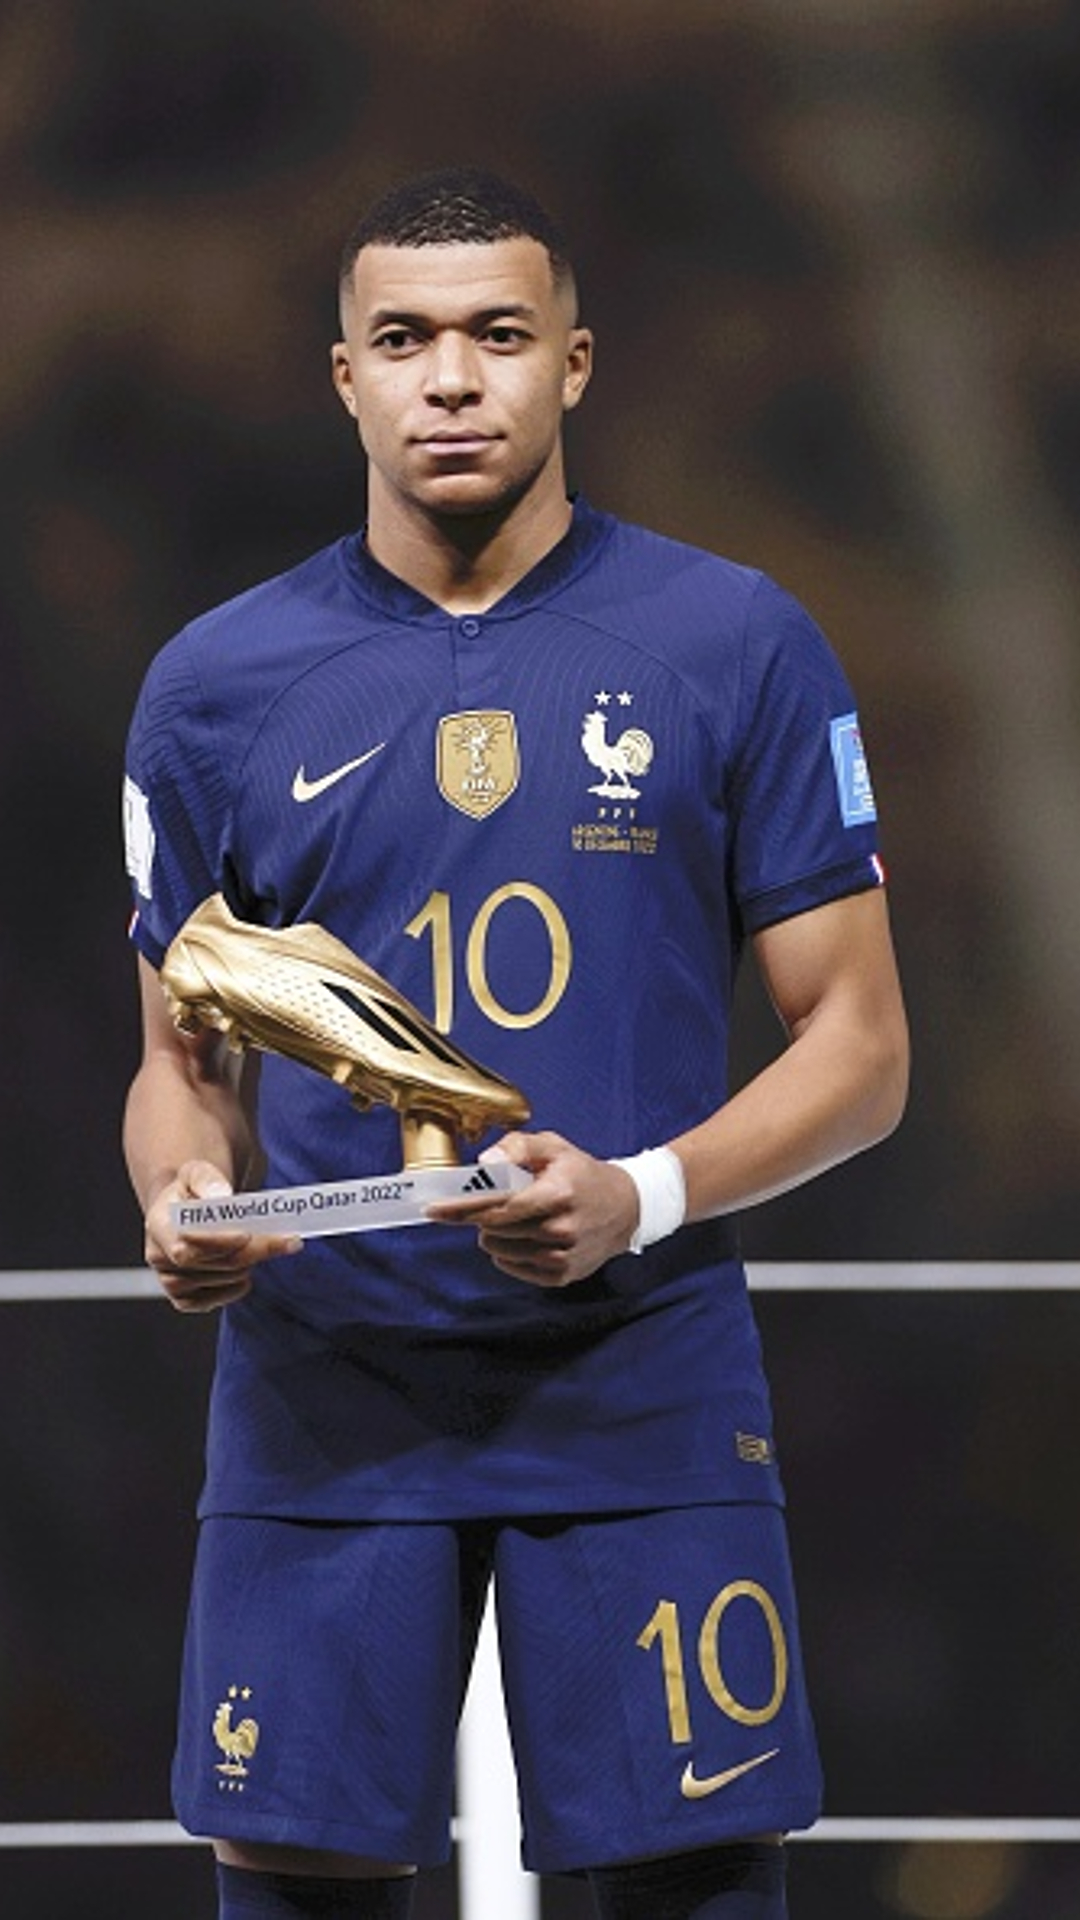 FIFA World Cup 2022: Mbappe secures Golden Boot with 8 goals, Messi settles for Silver Boot with 7 goals